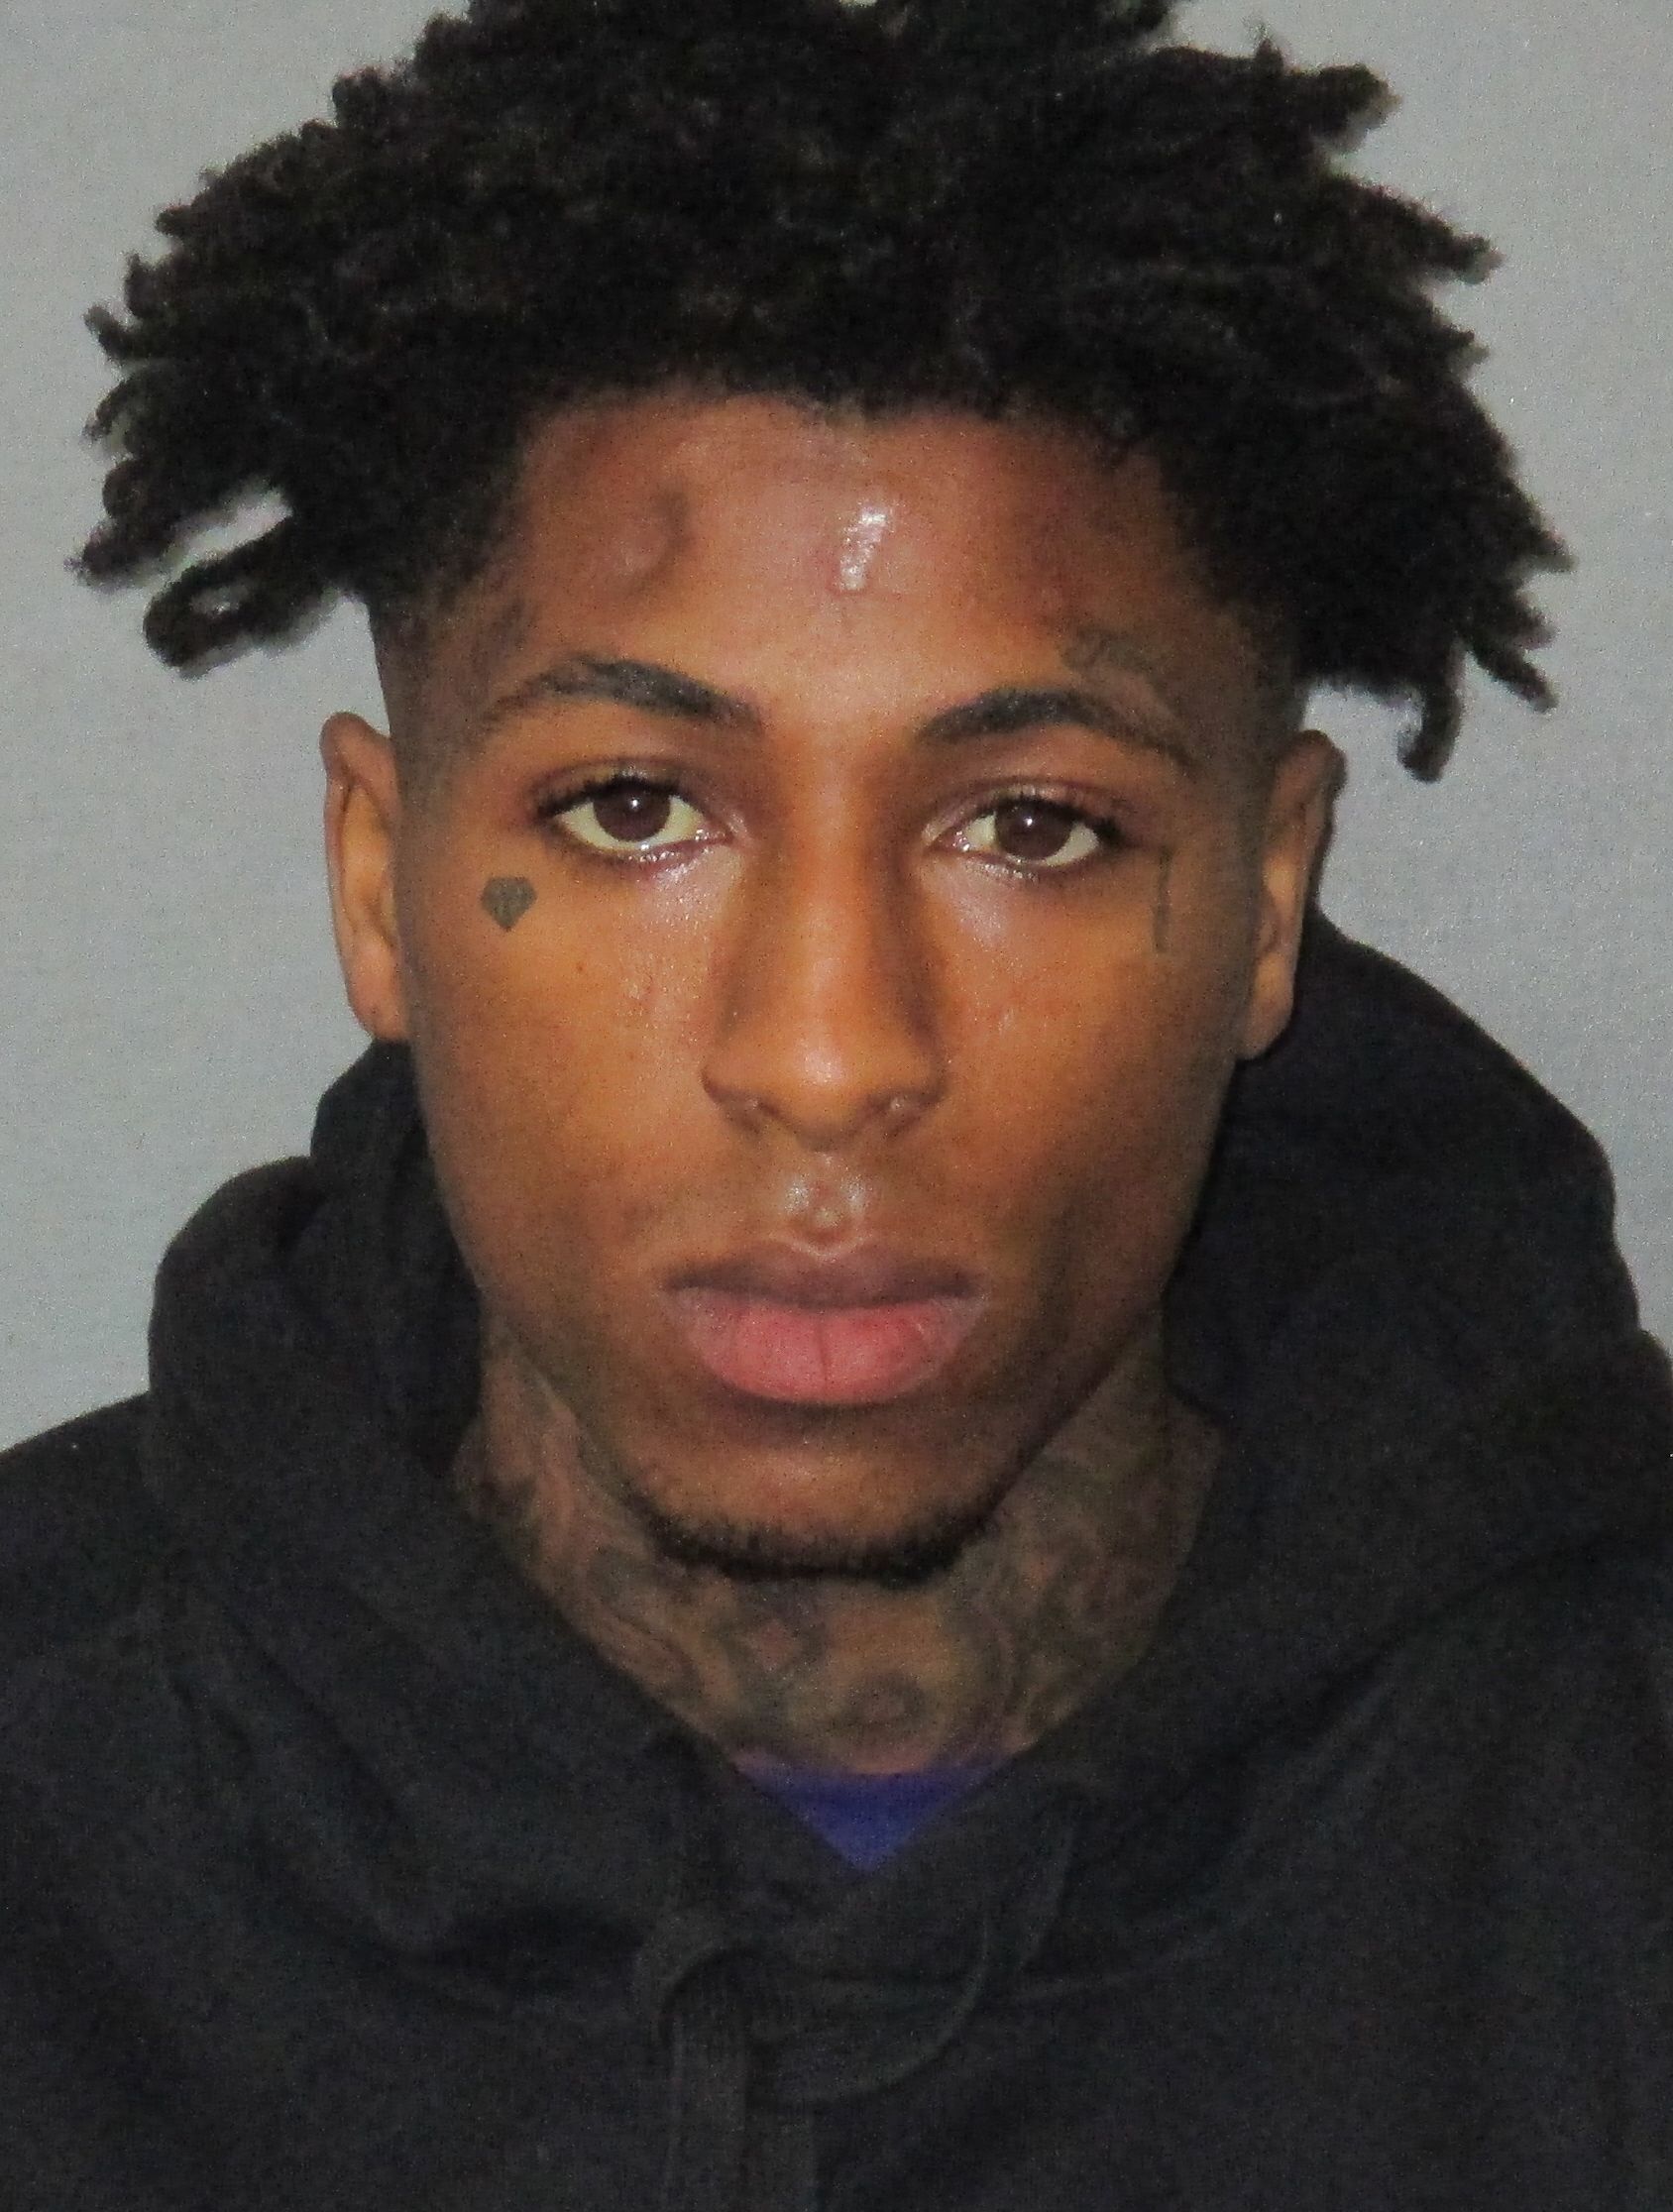 NBA youngboy dies in prison